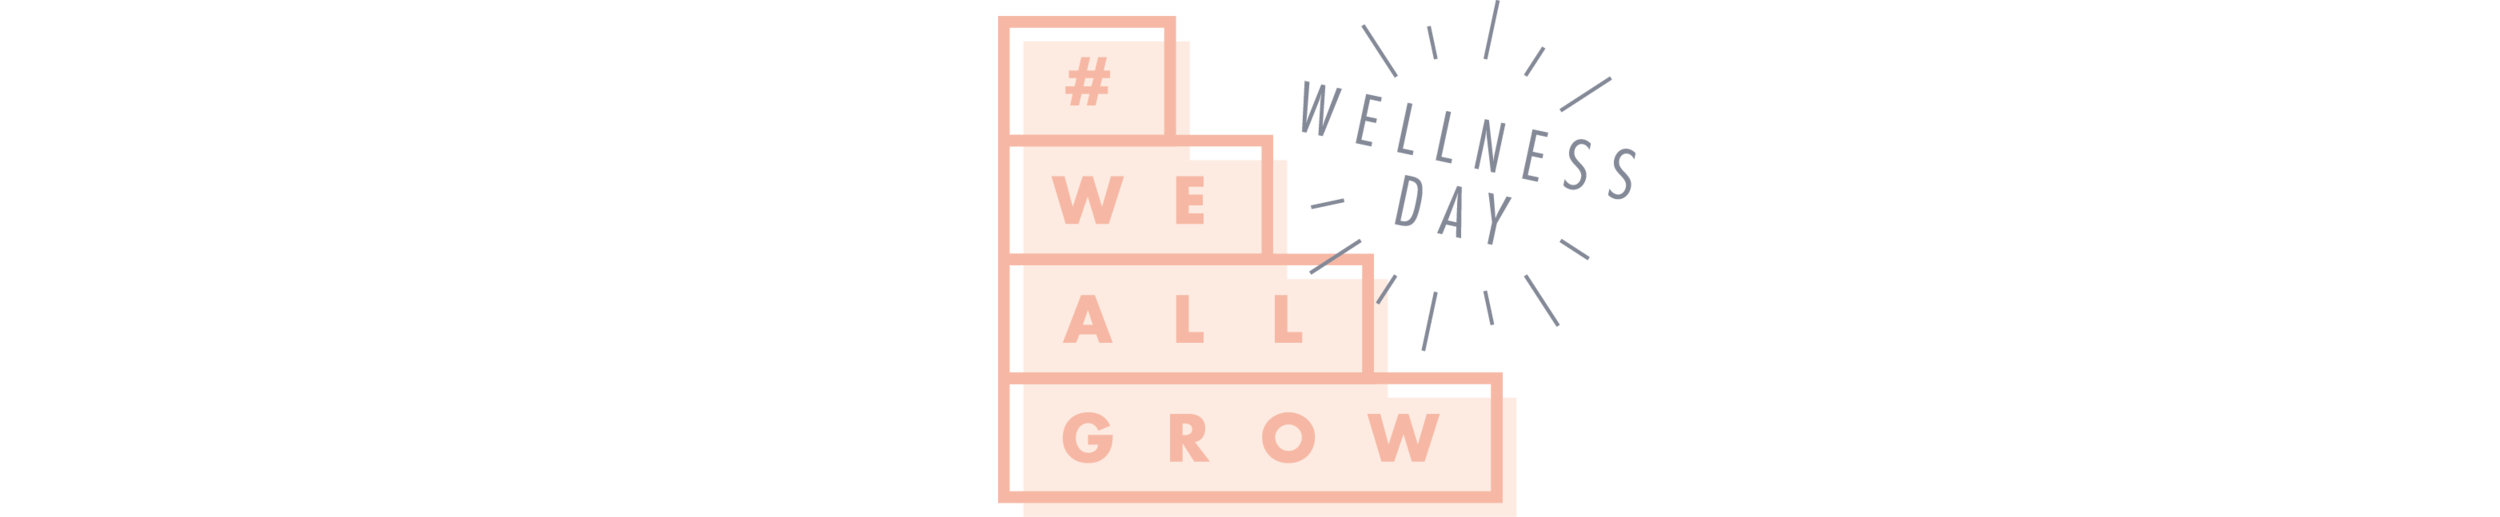 WAG-home_wellness-day-logo.png